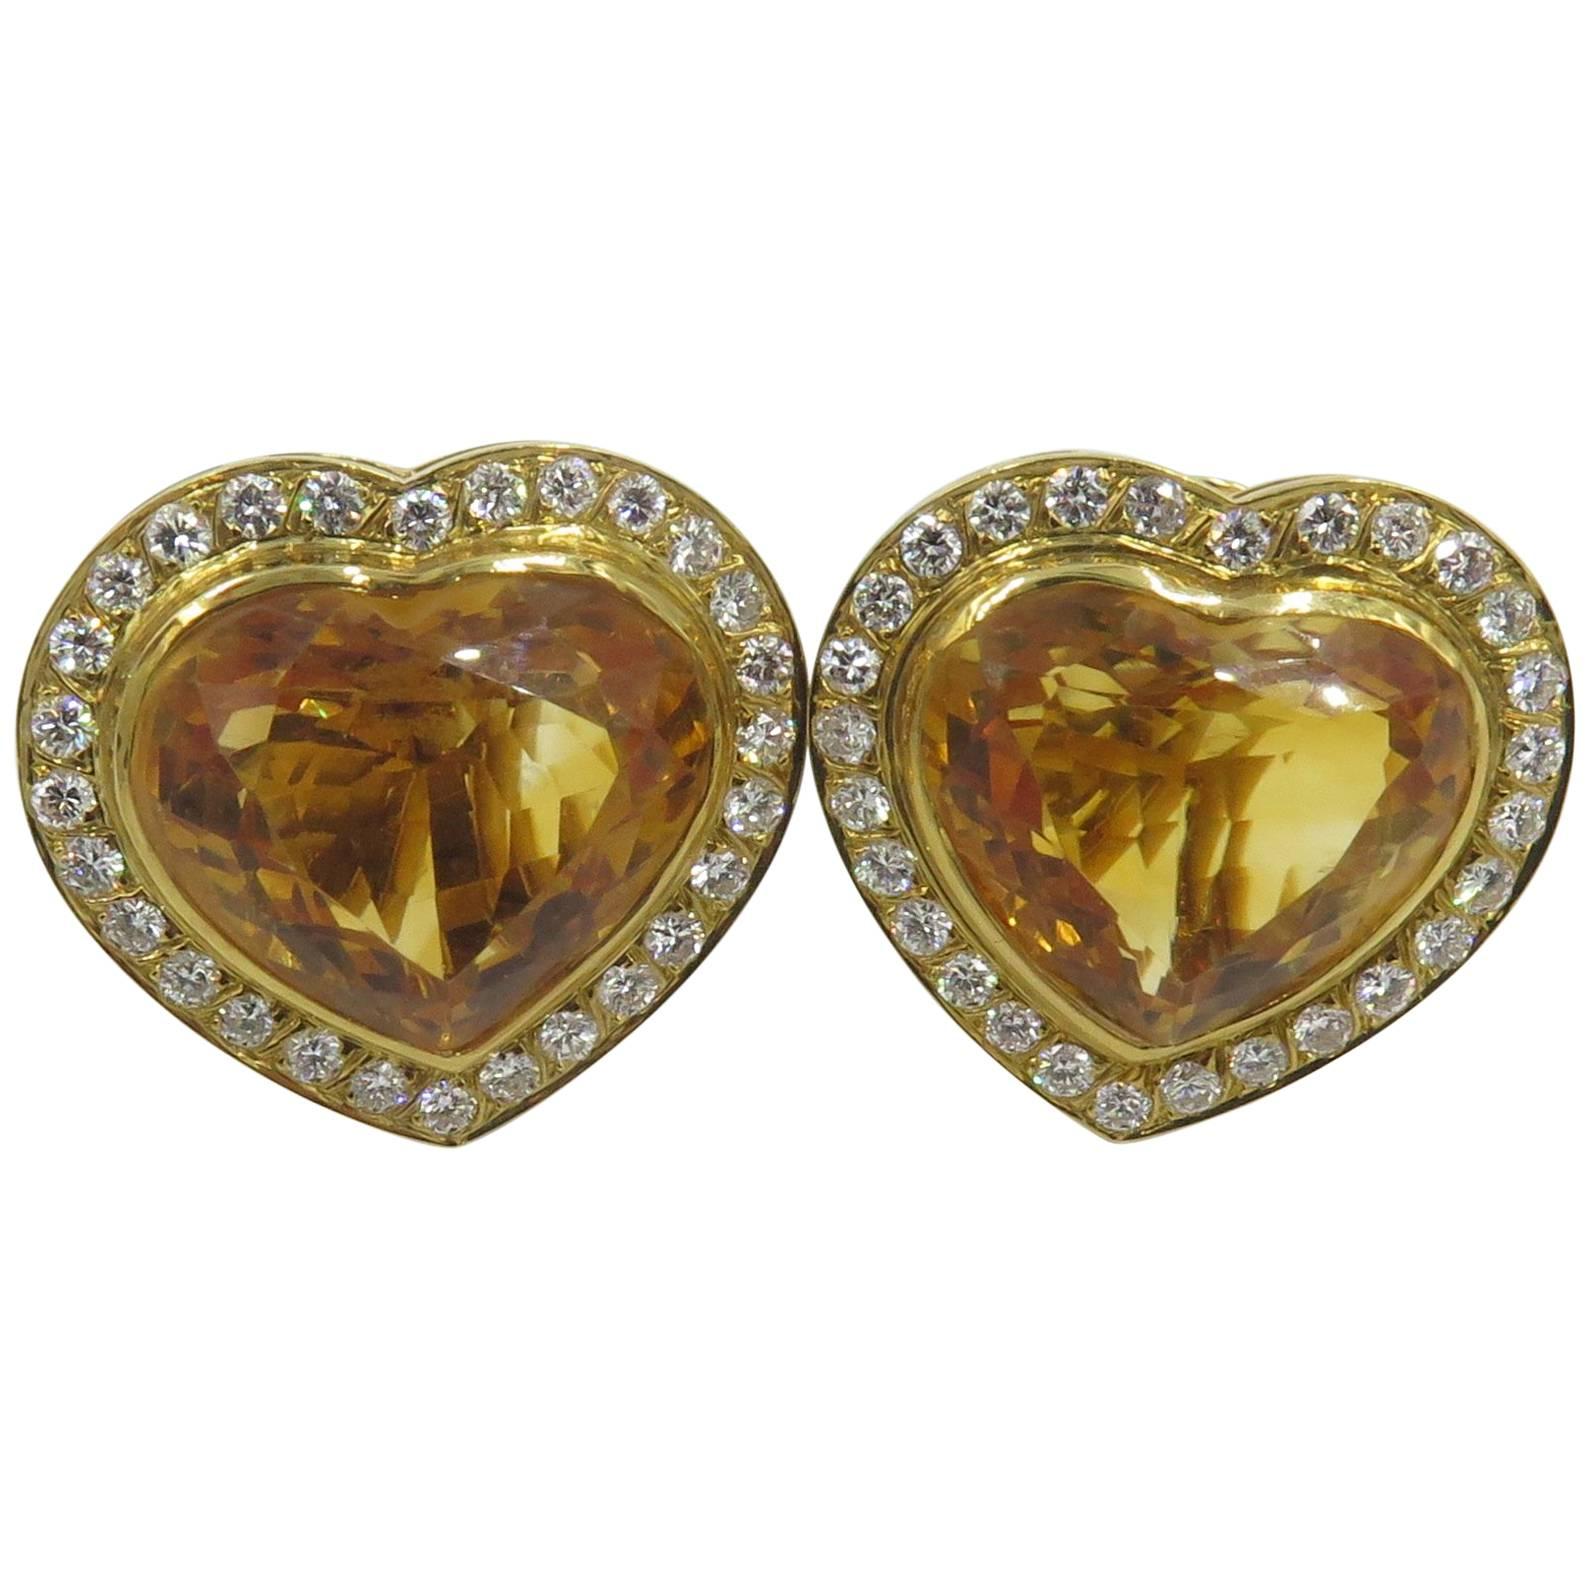 Pair of Citrine and Diamond Heart Shaped Earrings